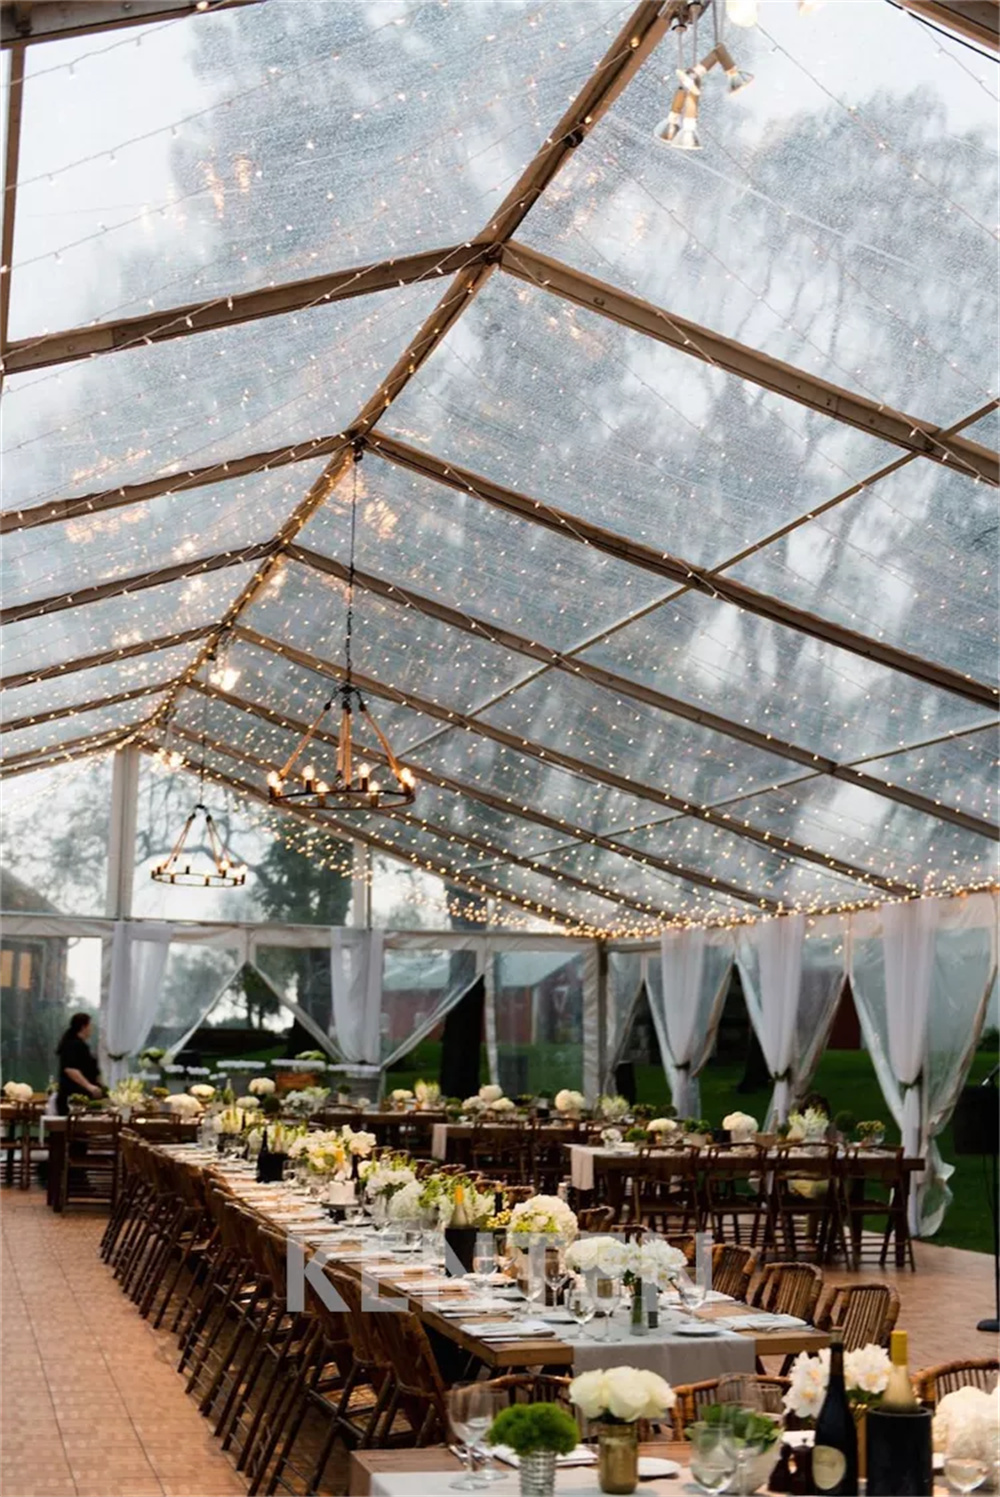 Weding tent hall 100 people outdoor white strech tent steel frame wedding party 10x 30 20x 30 ft